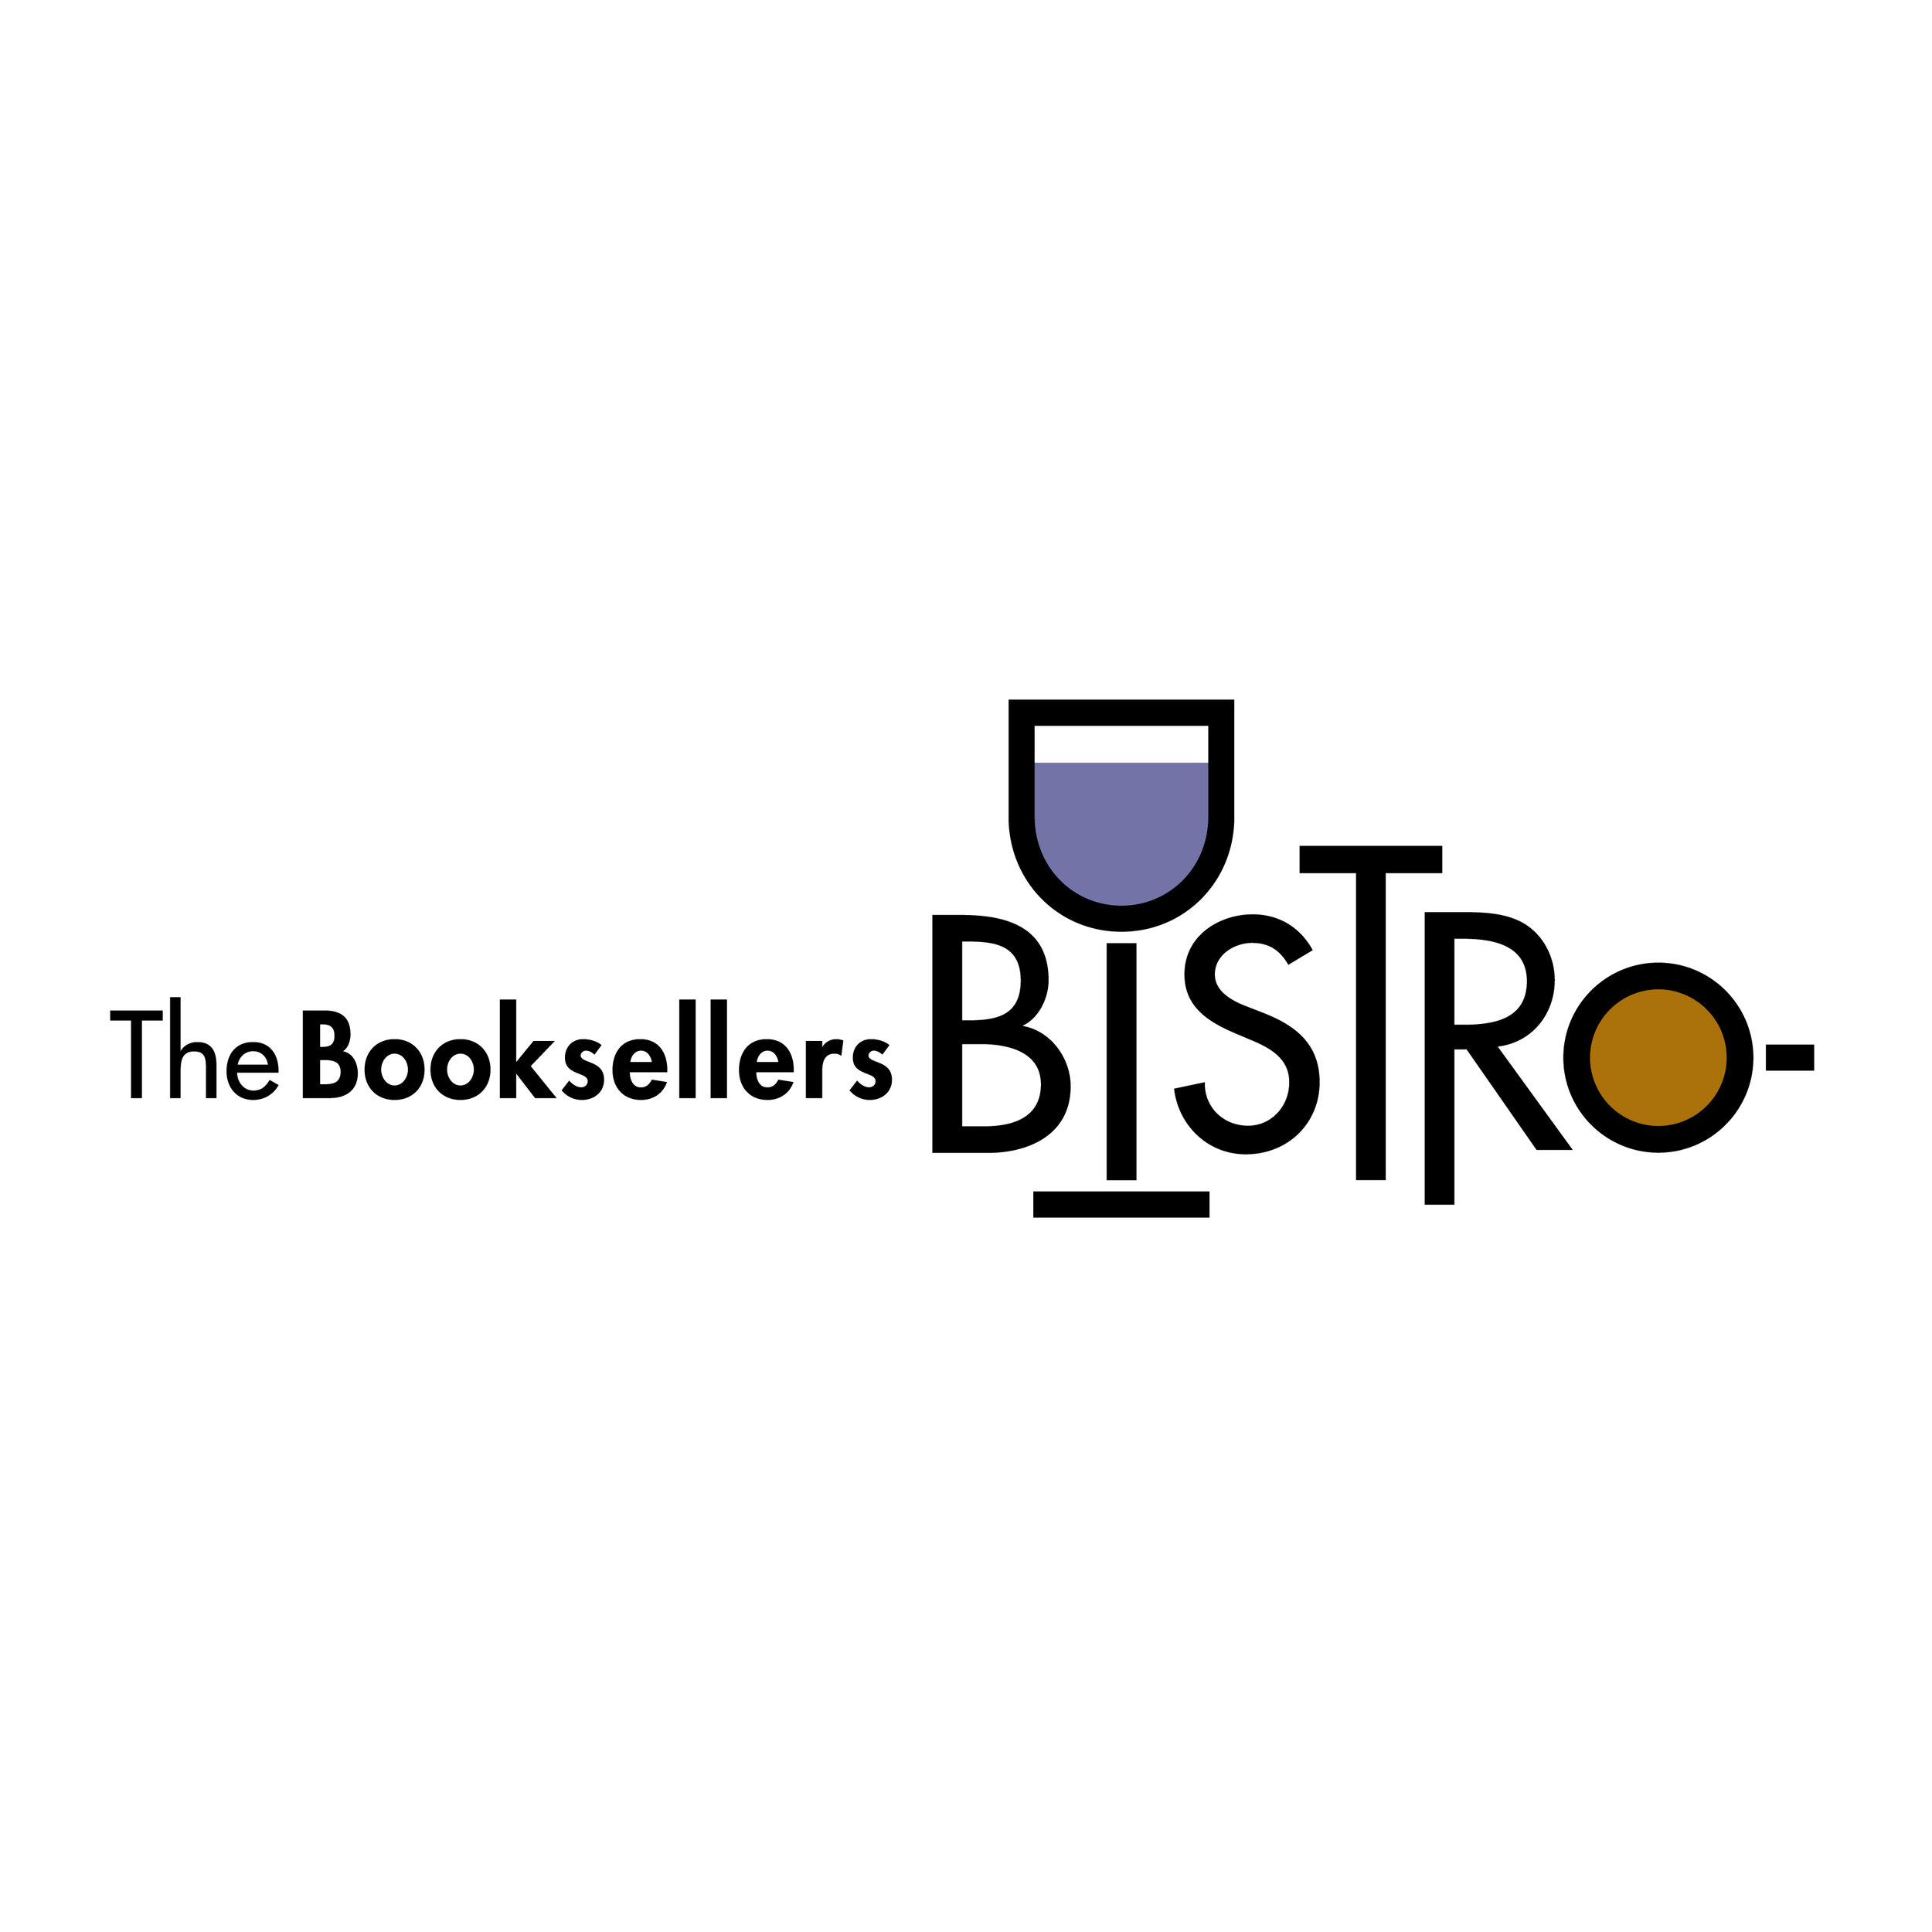  The Booksellers Bistro logo  Creative and design by Chuck Mitchell  Laurelwood Center Memphis, Tennessee 